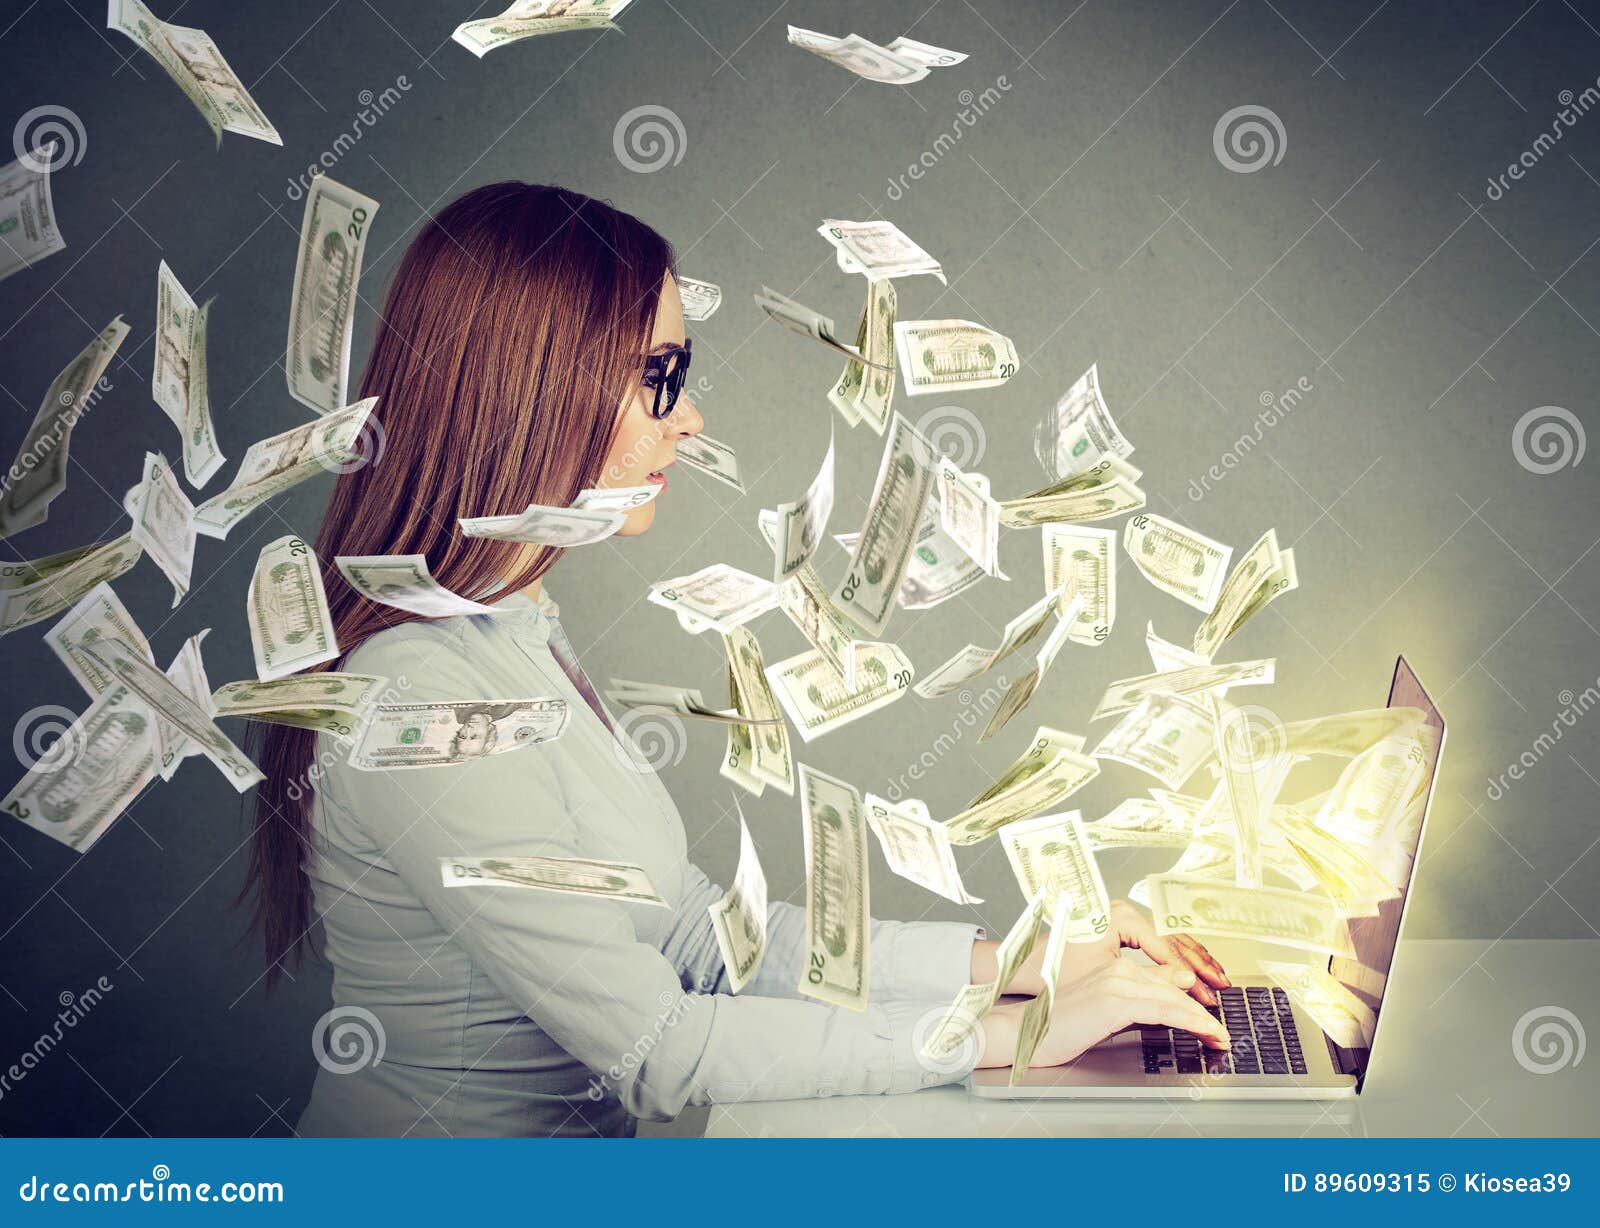 woman sitting at table using working on a laptop computer making money